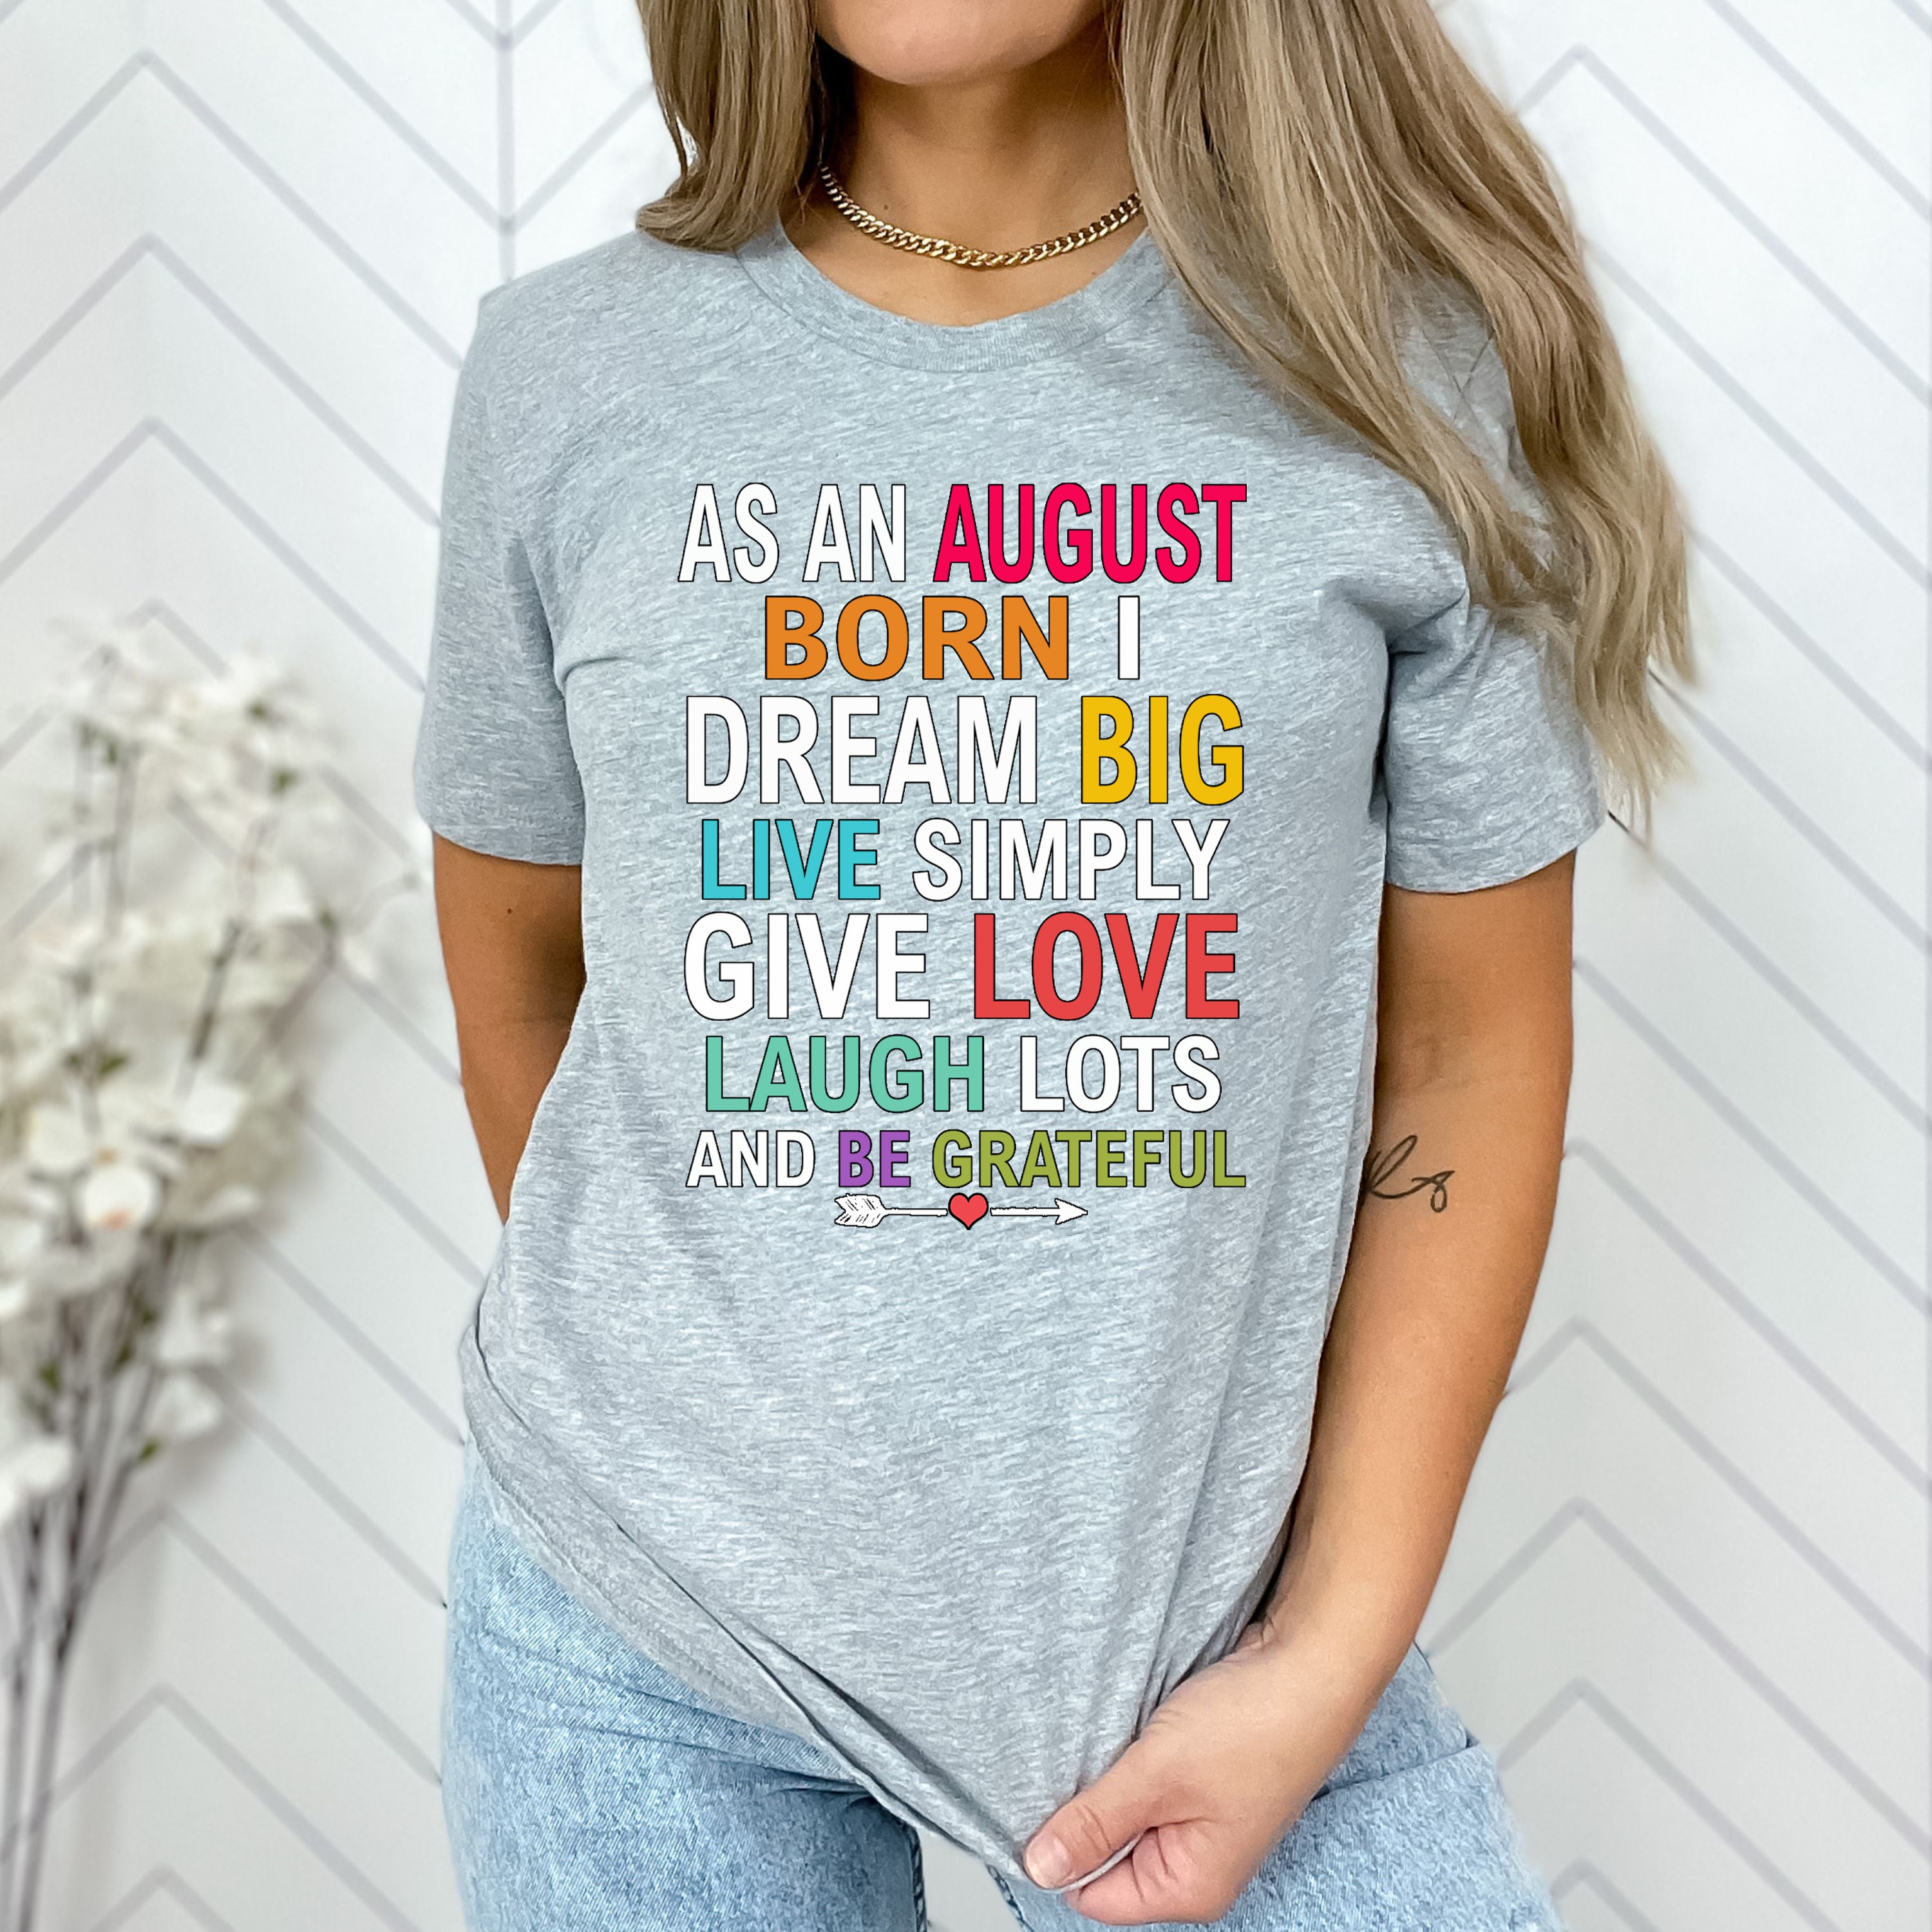 "As An August Born I Dream Big Live Simply & Be Grateful"